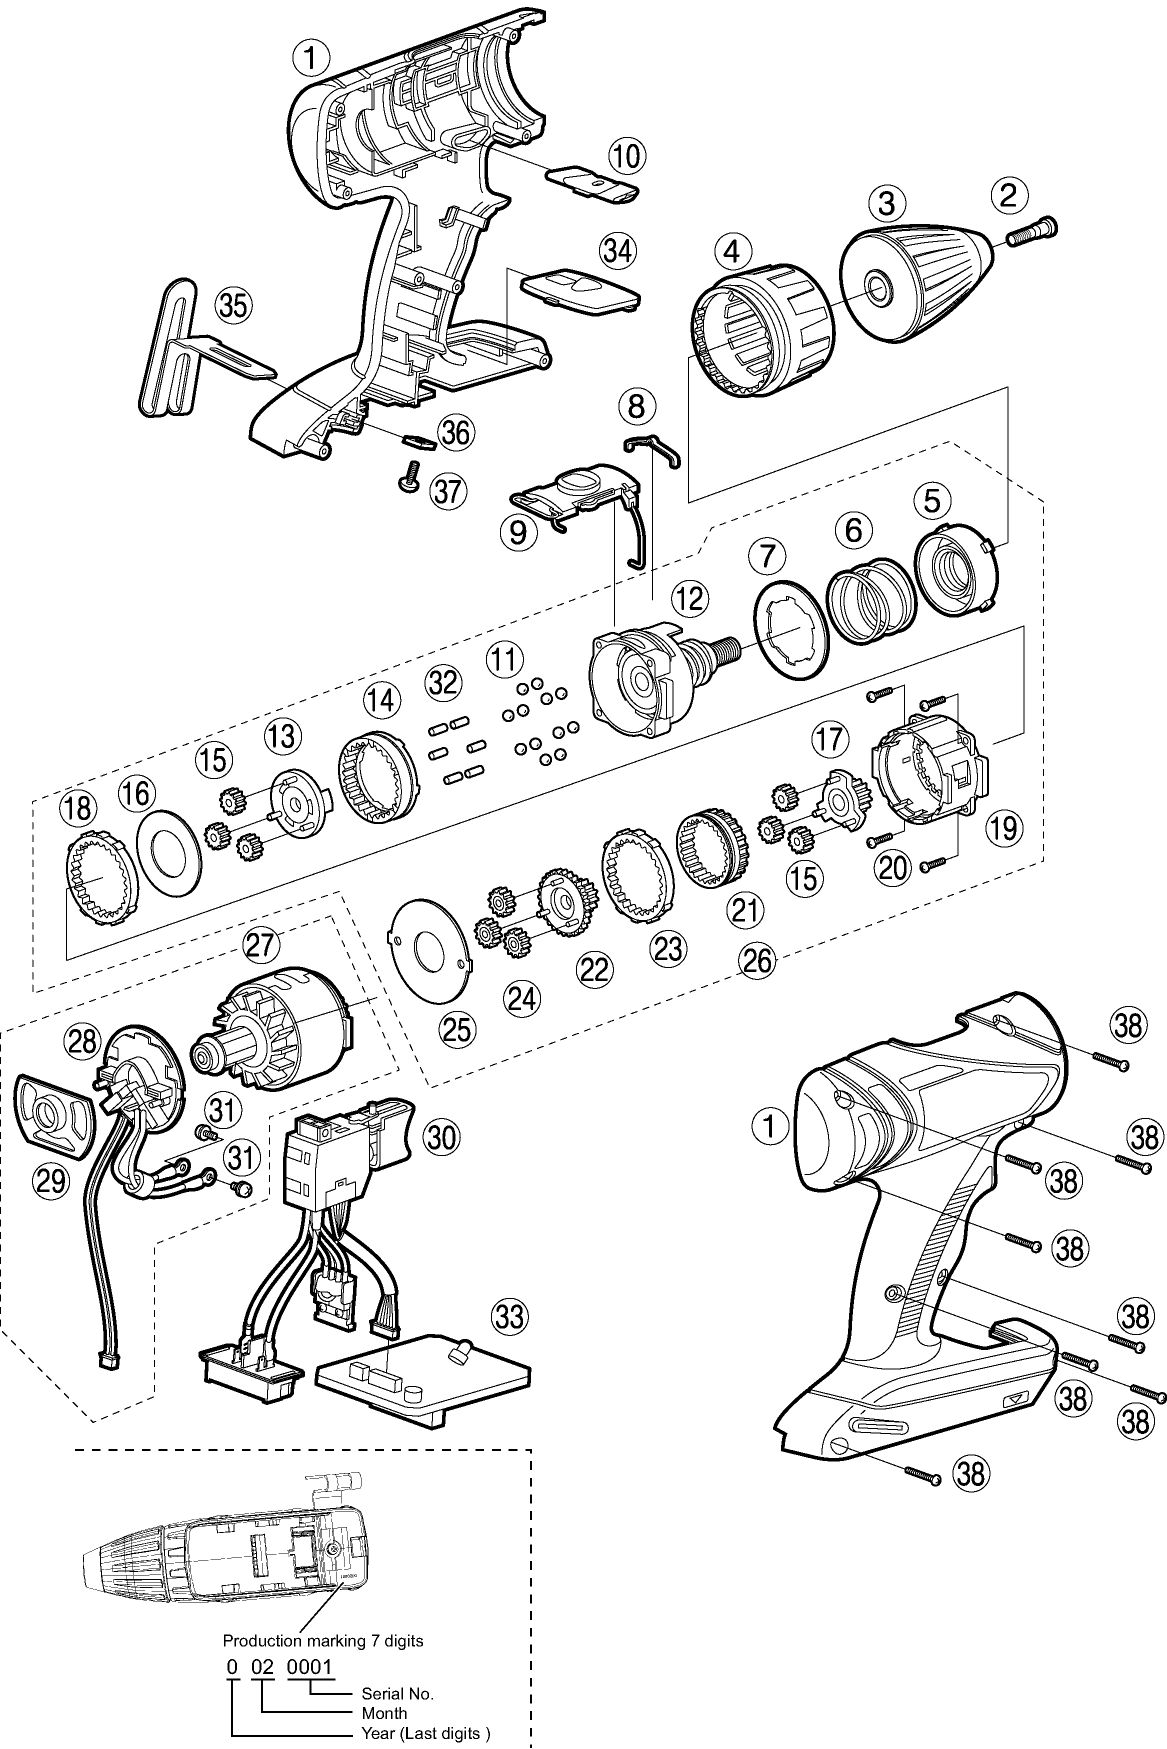 EY7441: Exploded View